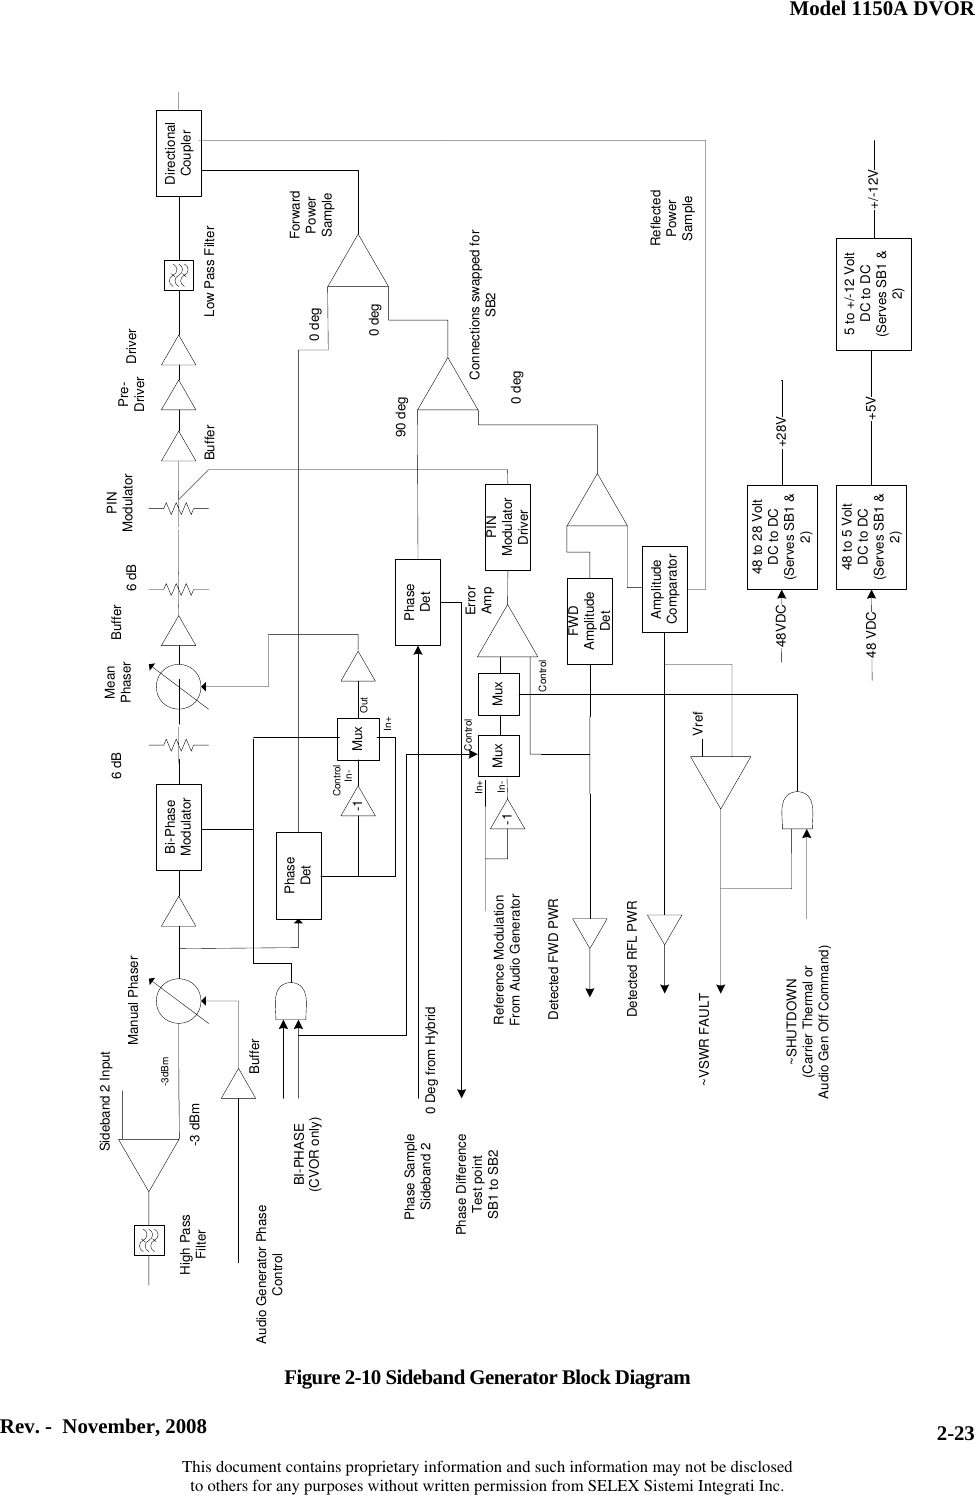  Model 1150A DVOR   Rev. -  November, 2008    This document contains proprietary information and such information may not be disclosed to others for any purposes without written permission from SELEX Sistemi Integrati Inc. 2-23                                                      Figure 2-10 Sideband Generator Block Diagram Sideband 2 InputManual PhaserBi-PhaseModulatorPhaseDetBufferAudio Generator PhaseControl-3 dBmBufferDirectionalCouplerPre-Driver Driver-1 MuxFWDAmplitudeDetPINModulatorDriverReference ModulationFrom Audio GeneratorDetected FWD PWRMuxAmplitudeComparatorDetected RFL PWRHigh PassFilter6 dB MeanPhaser 6 dBPINModulatorBuffer-1 Mux(CVOR only)BI-PHASE~SHUTDOWN(Carrier Thermal orAudio Gen Off Command)~VSWR FAULTControlIn-In+OutIn-In+ControlControl-3dBm48 to 28 Volt DC to DC(Serves SB1 &amp; 2)48 to 5 Volt DC to DC(Serves SB1 &amp; 2)5 to +/-12 Volt DC to DC(Serves SB1 &amp; 2)+5V48VDC48 VDC+28V+/-12VPhaseDetPhase SampleSideband 2Phase DifferenceTest pointSB1 to SB20 deg0 deg0 deg90 degConnections swapped for SB20 Deg from HybridLow Pass FilterForwardPowerSampleReflectedPowerSampleErrorAmpVref